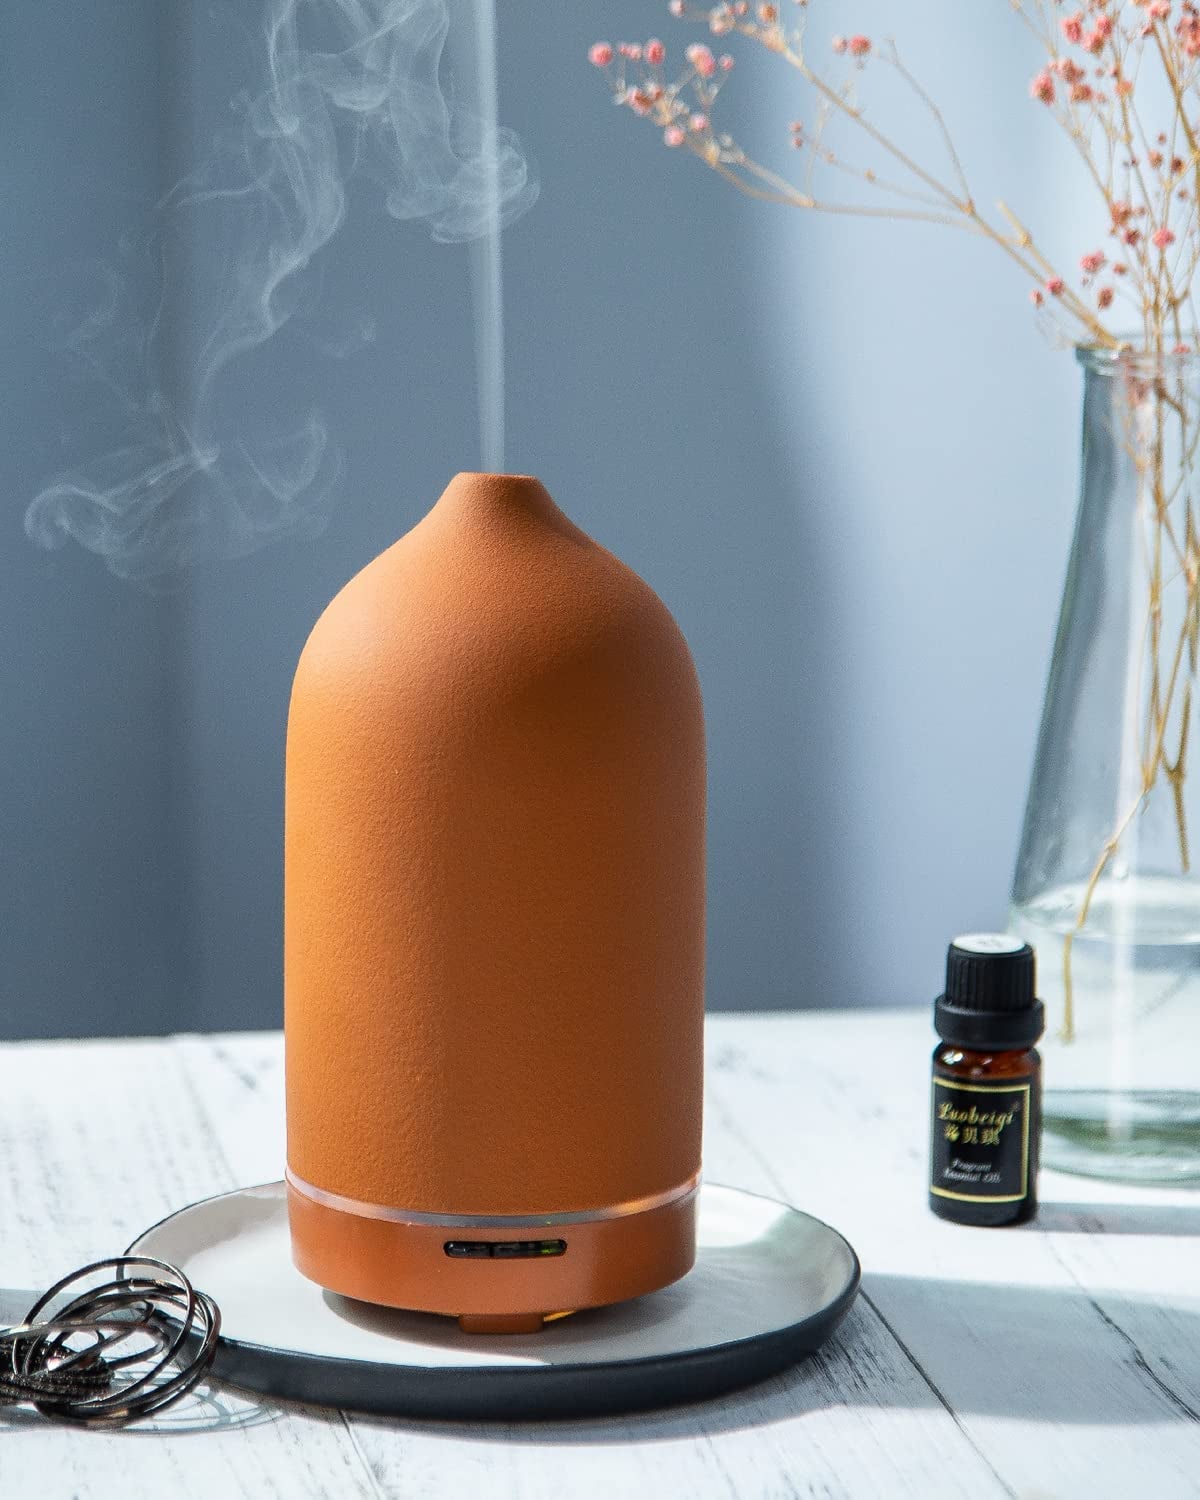 a terracotta colored ceramic oil diffuser with mist coming out of the top